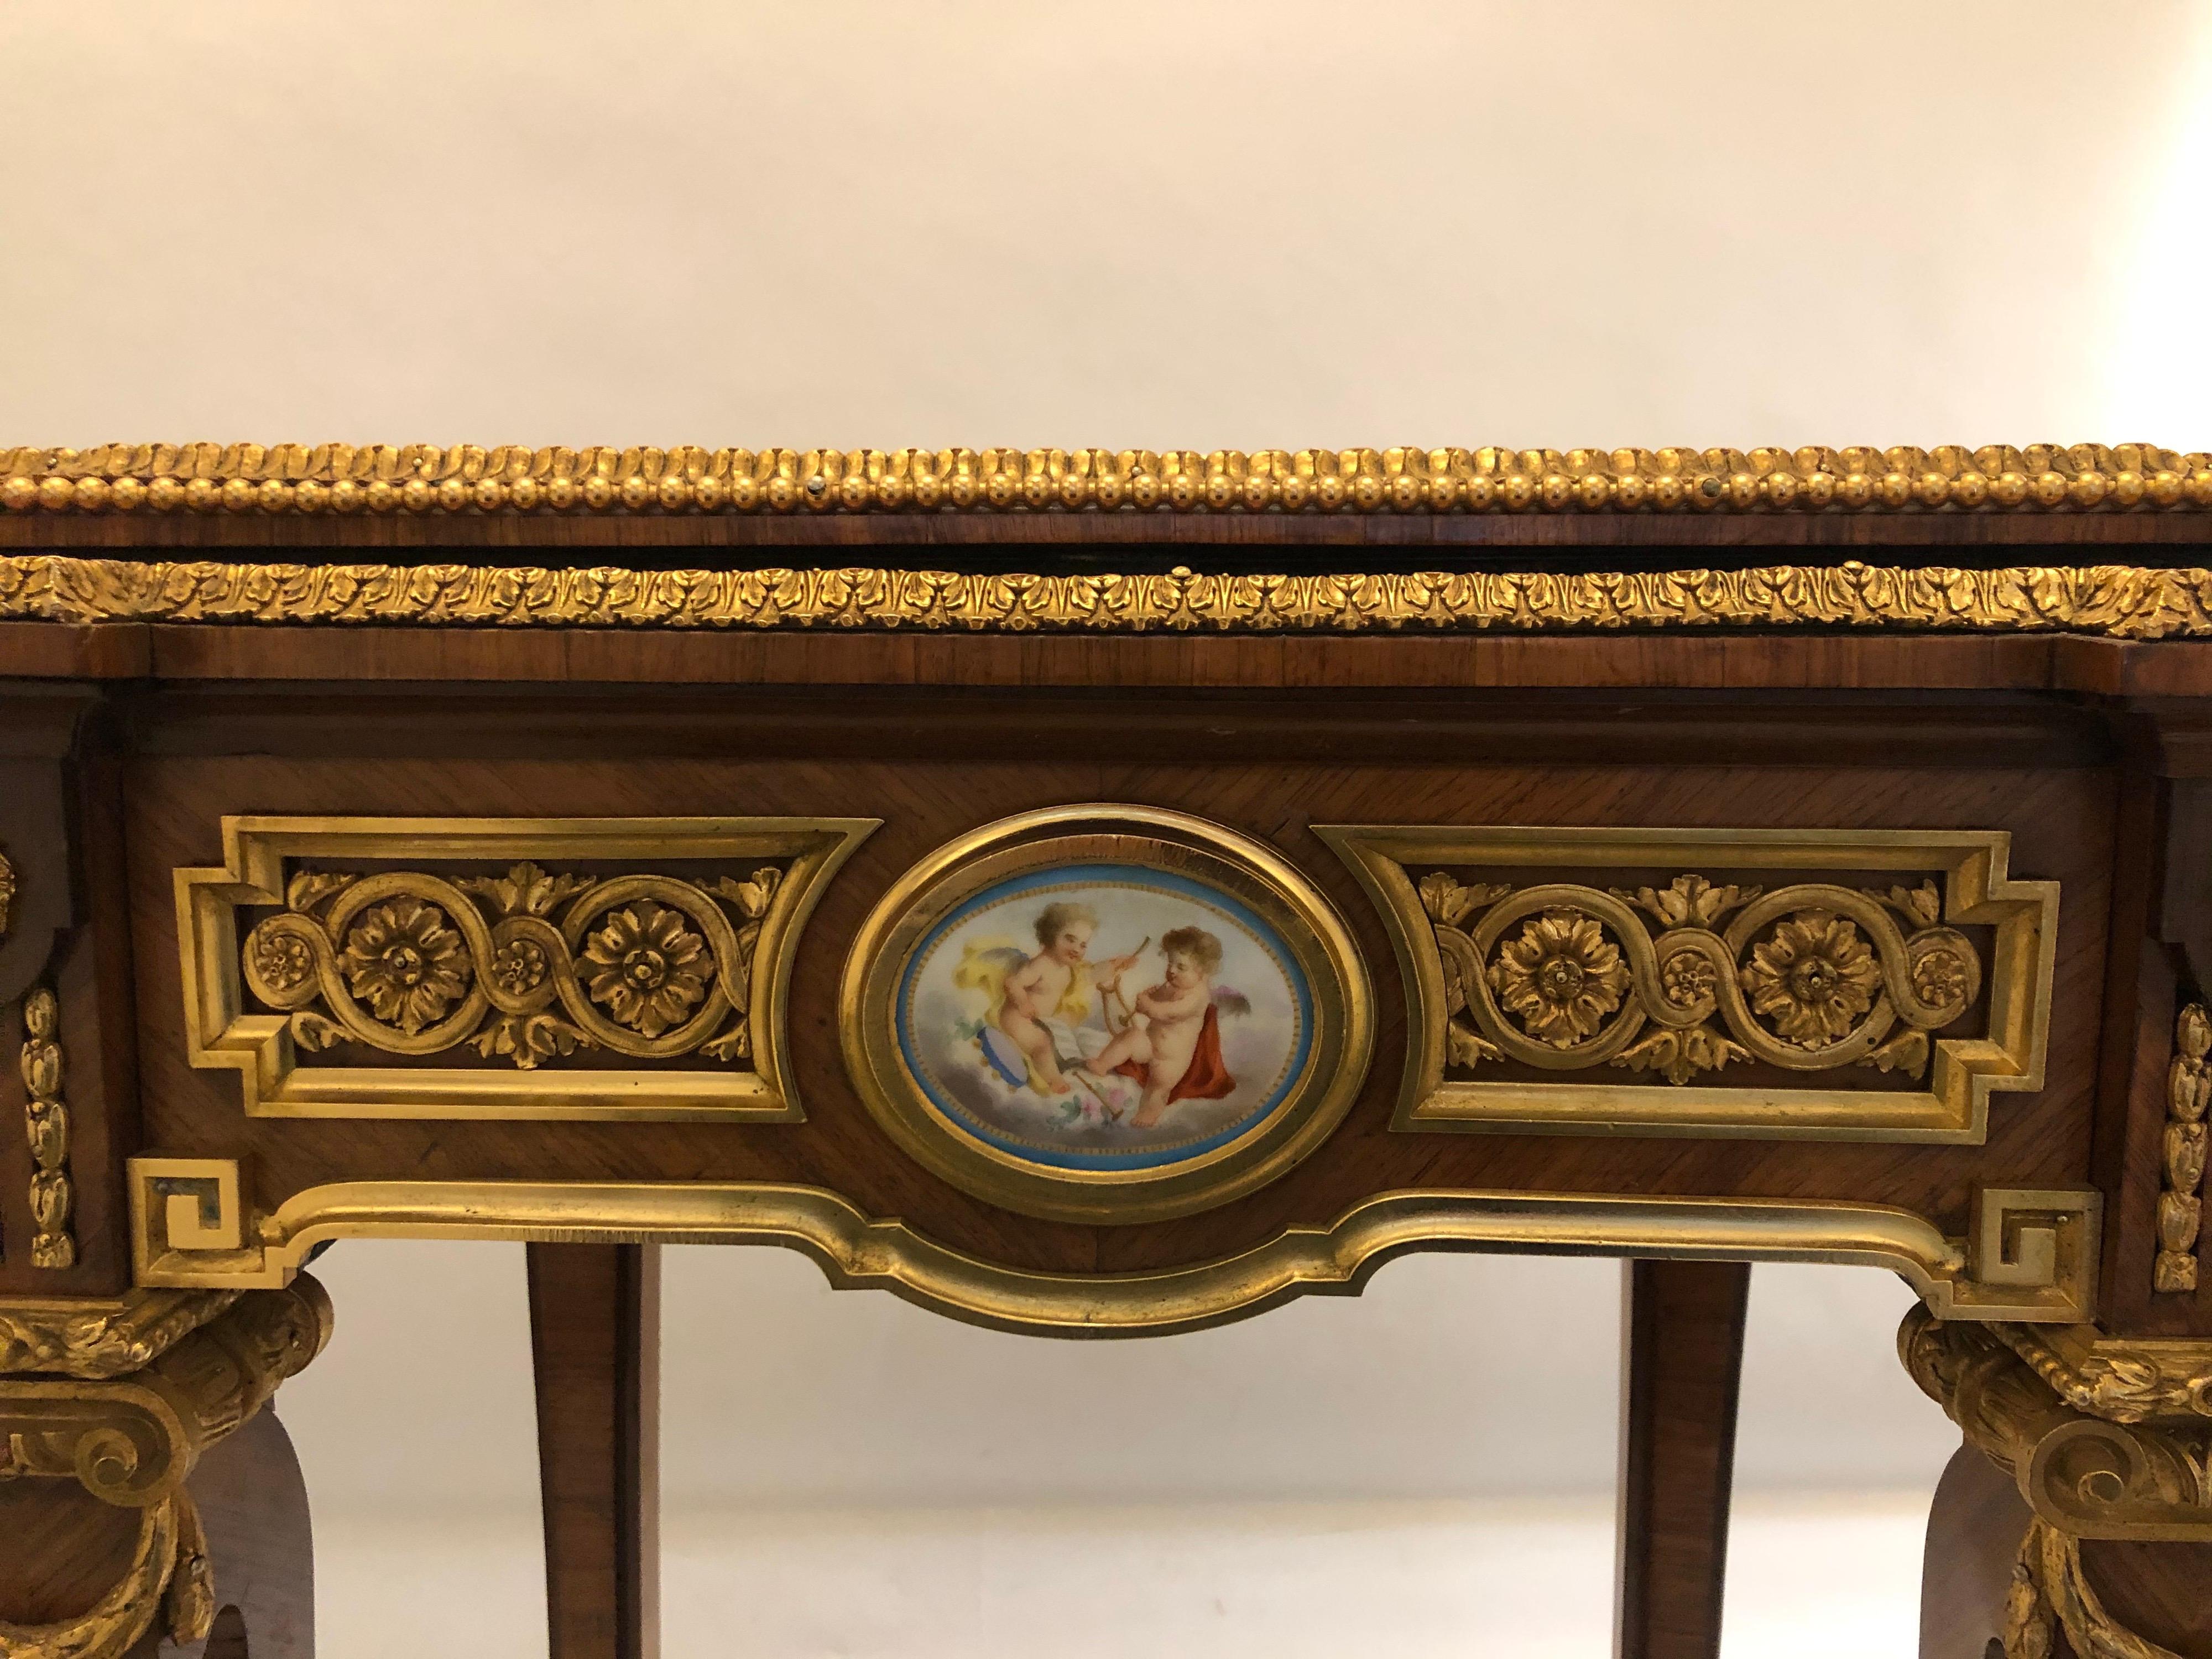 19th century French, King Louis XVI wood jardinière. Hand painted porcelain plaque with five ormolu mounts, in the manner of Henry Dasson.